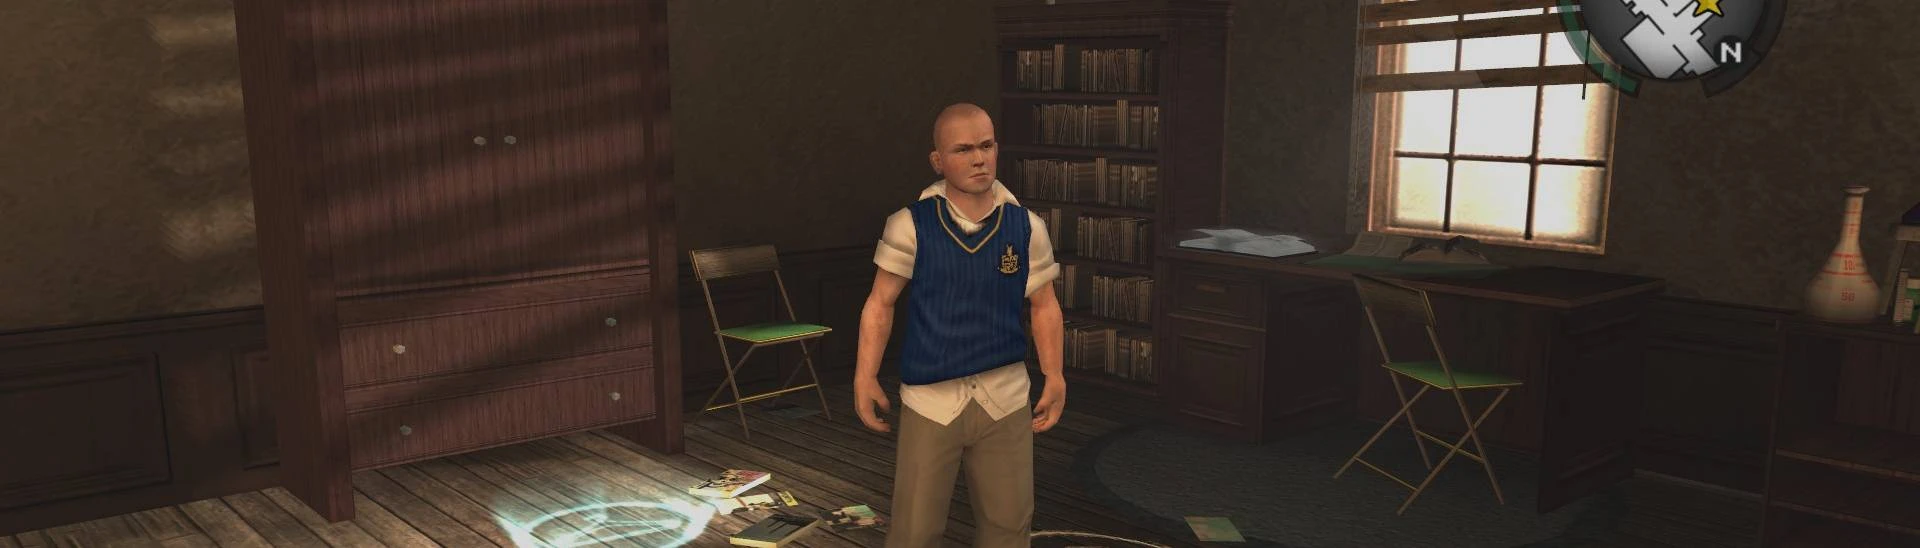 Bully Scholarship Definitive Edition (MOD PACK) at Bully